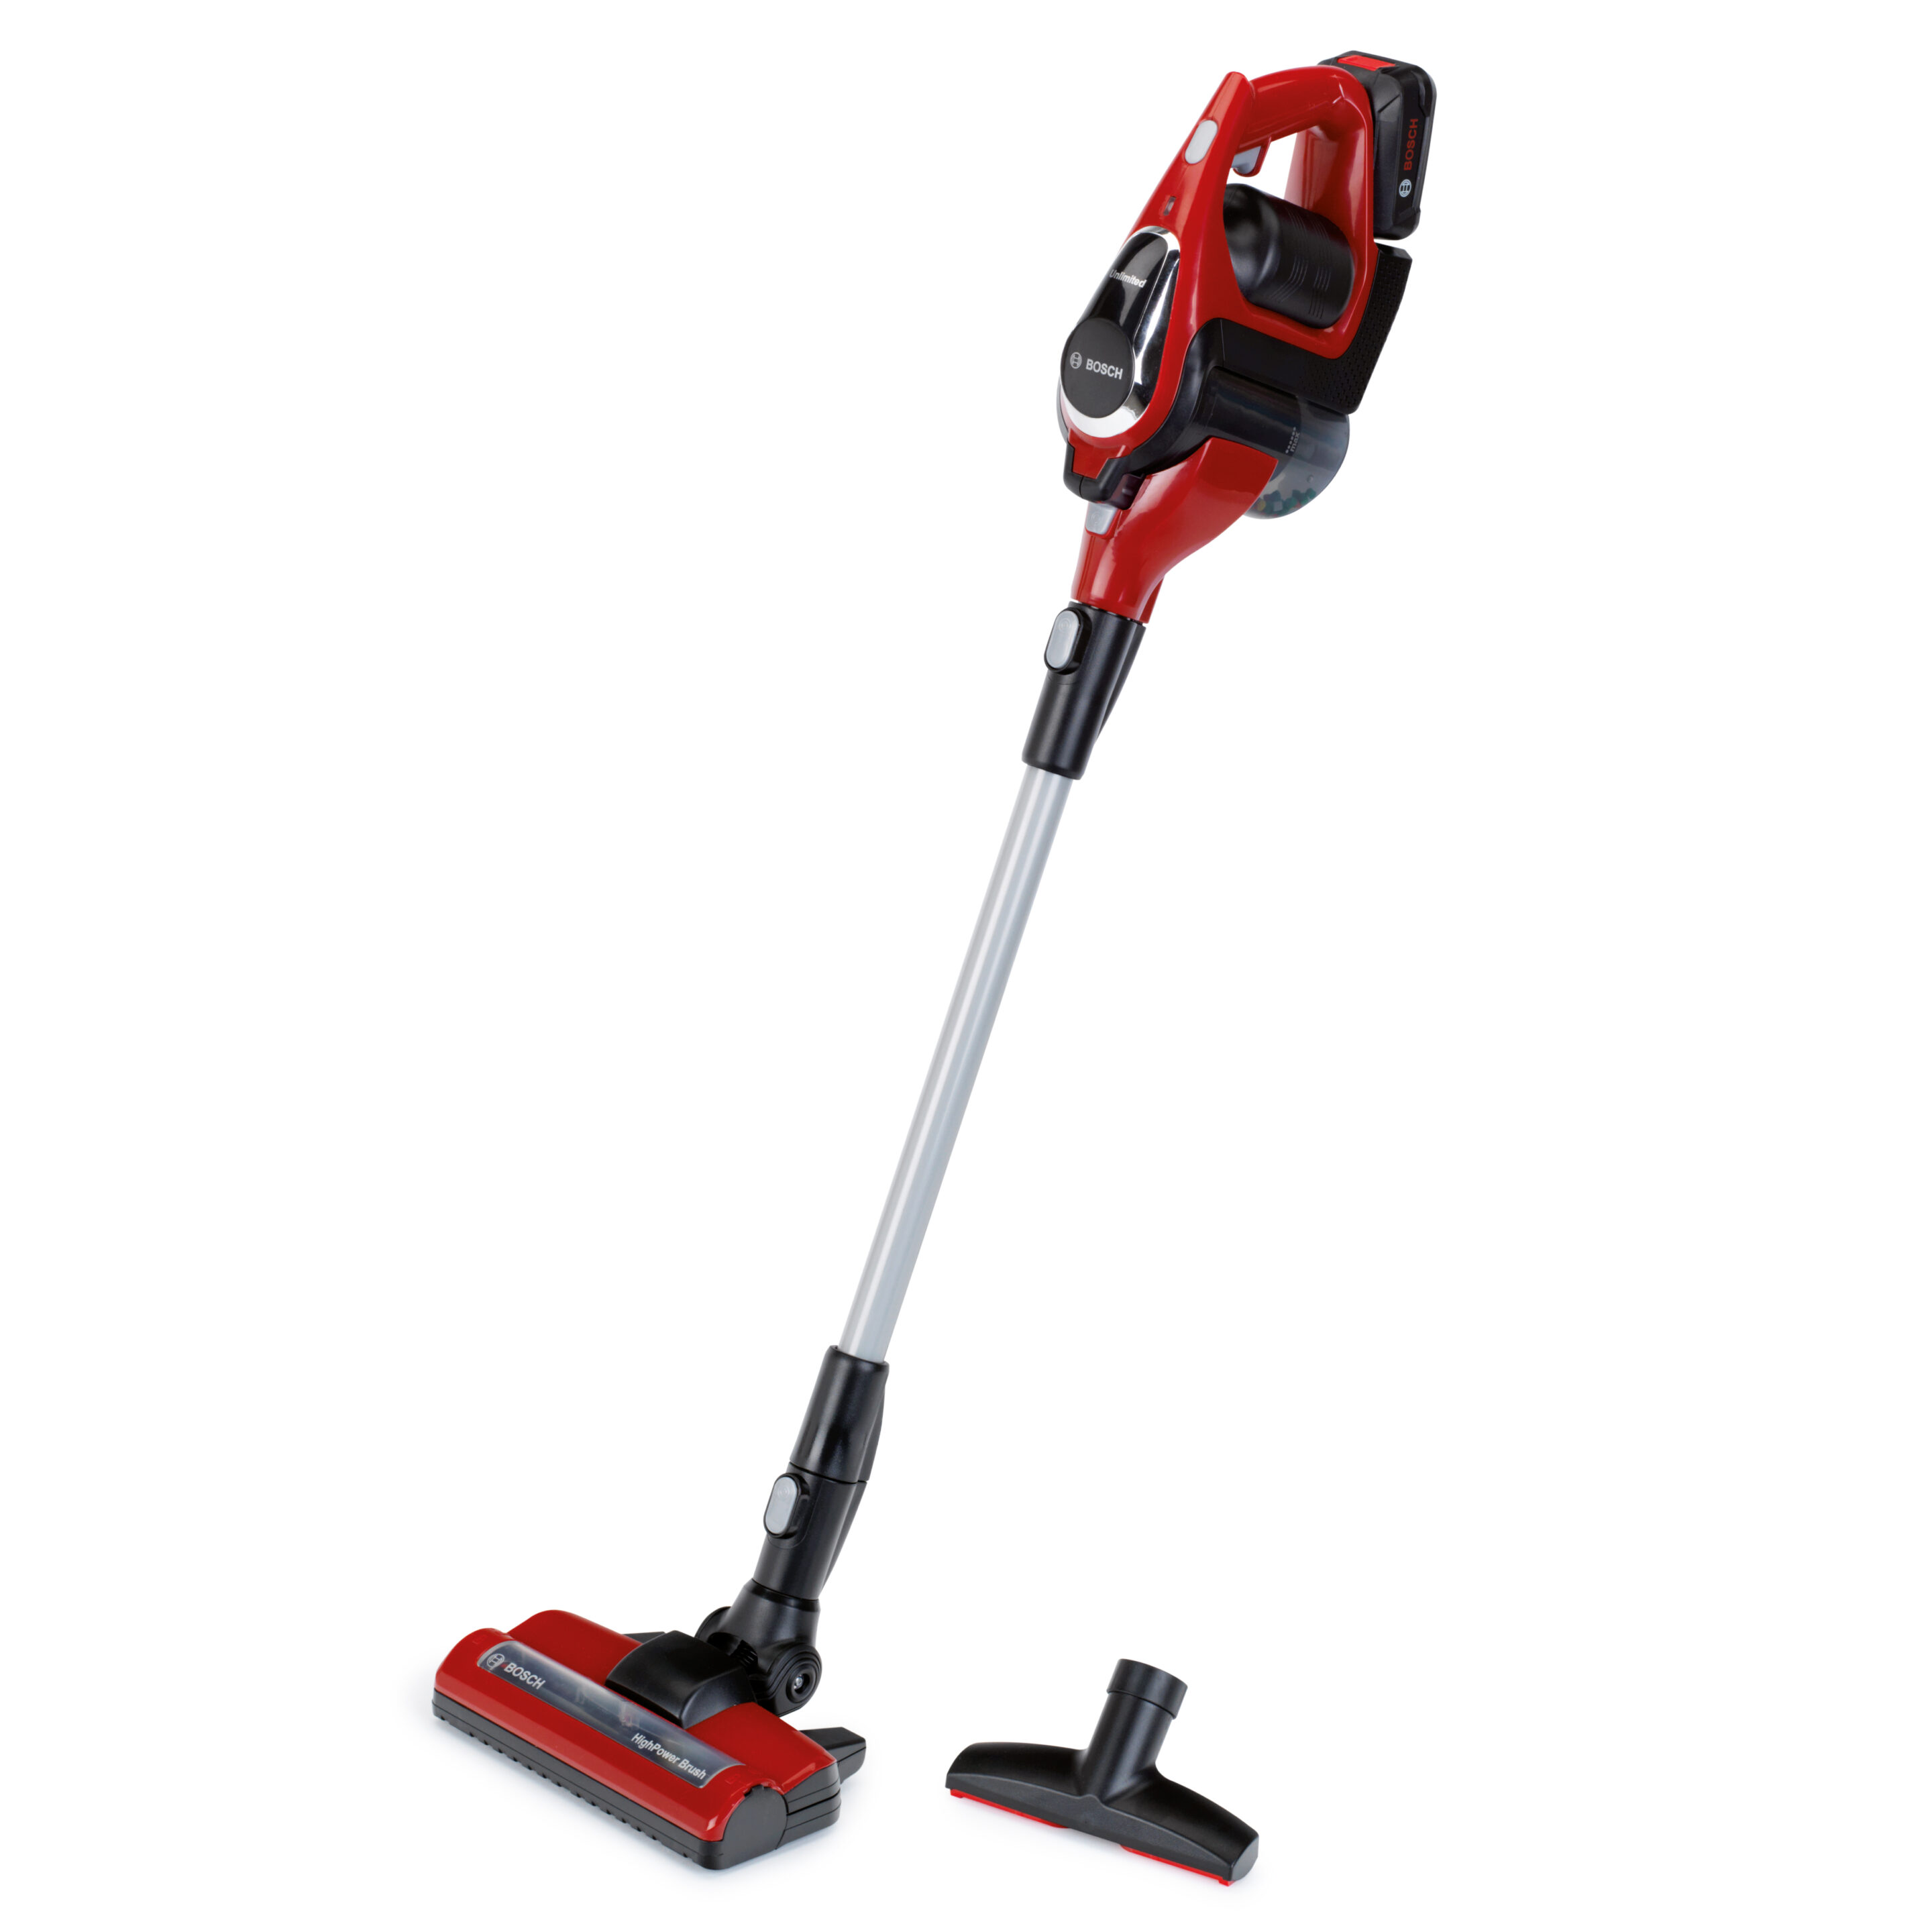 Bosch - Vacuum Cleaner "Unlimited", red